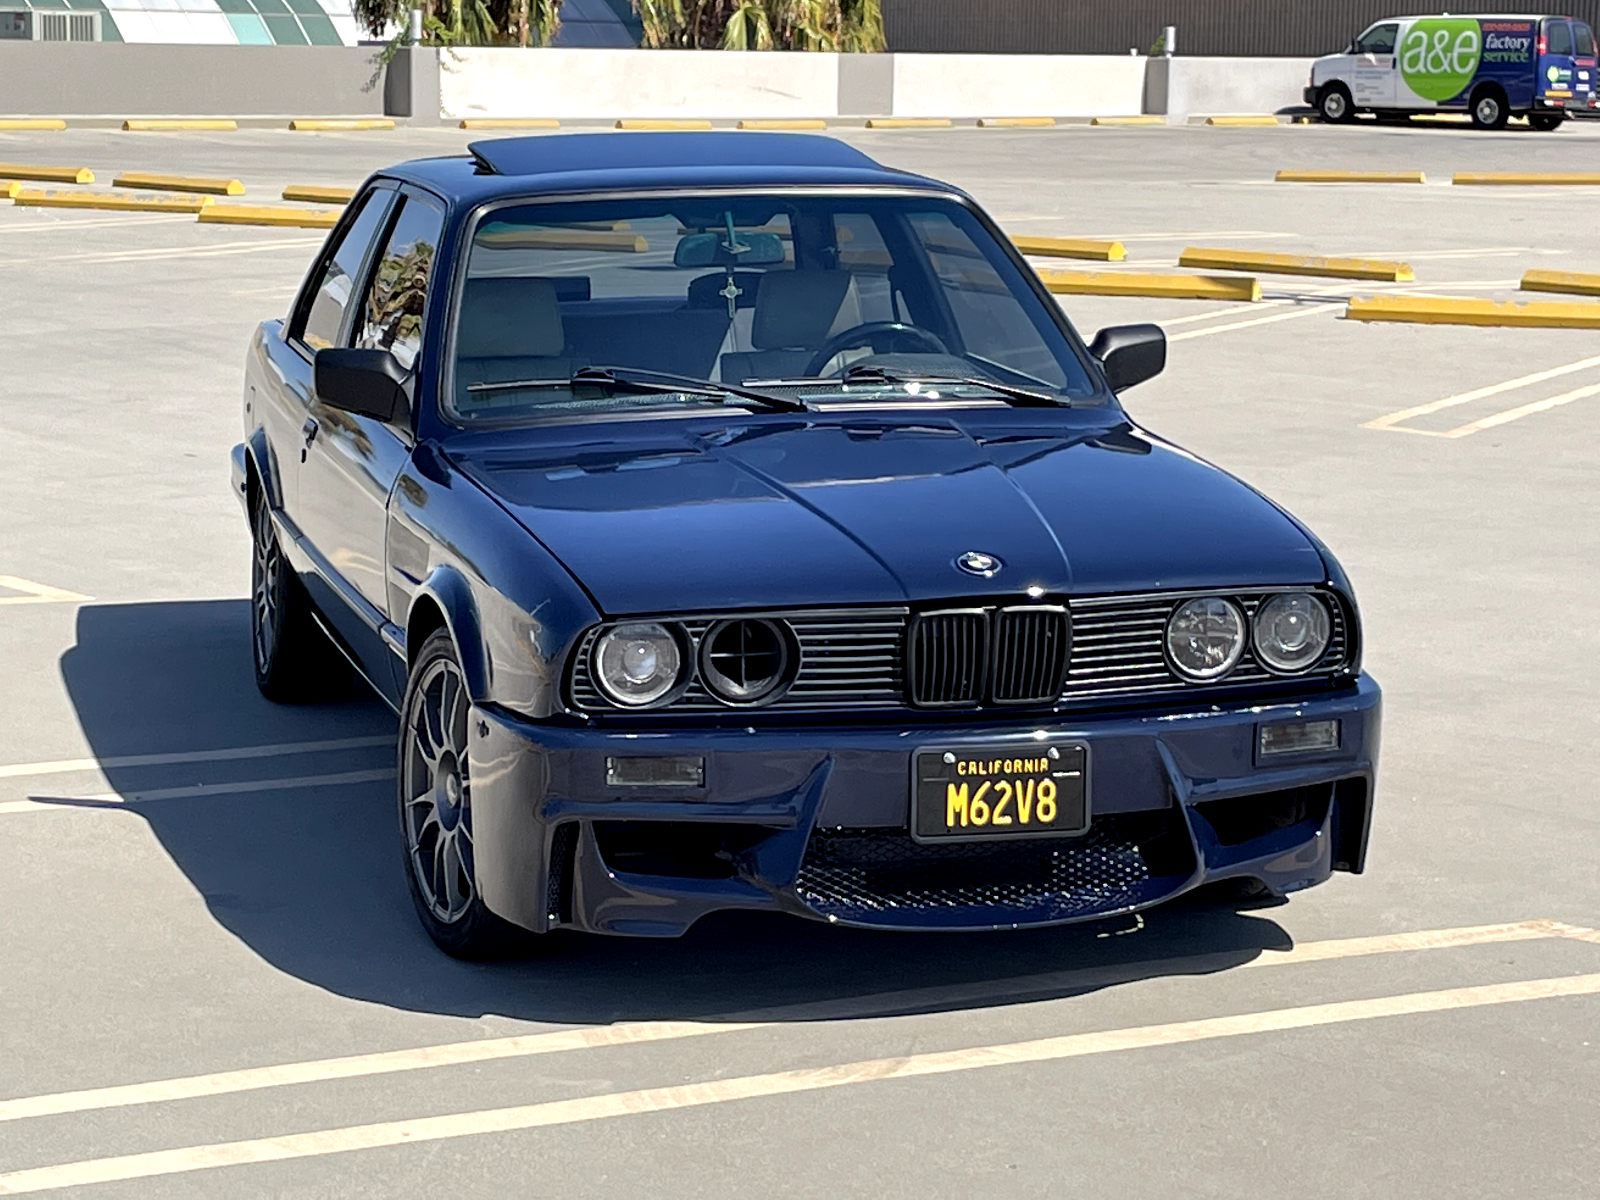 The Ultimate BMW Conversion: An E30 Gets V-8 Power -  Motors Blog